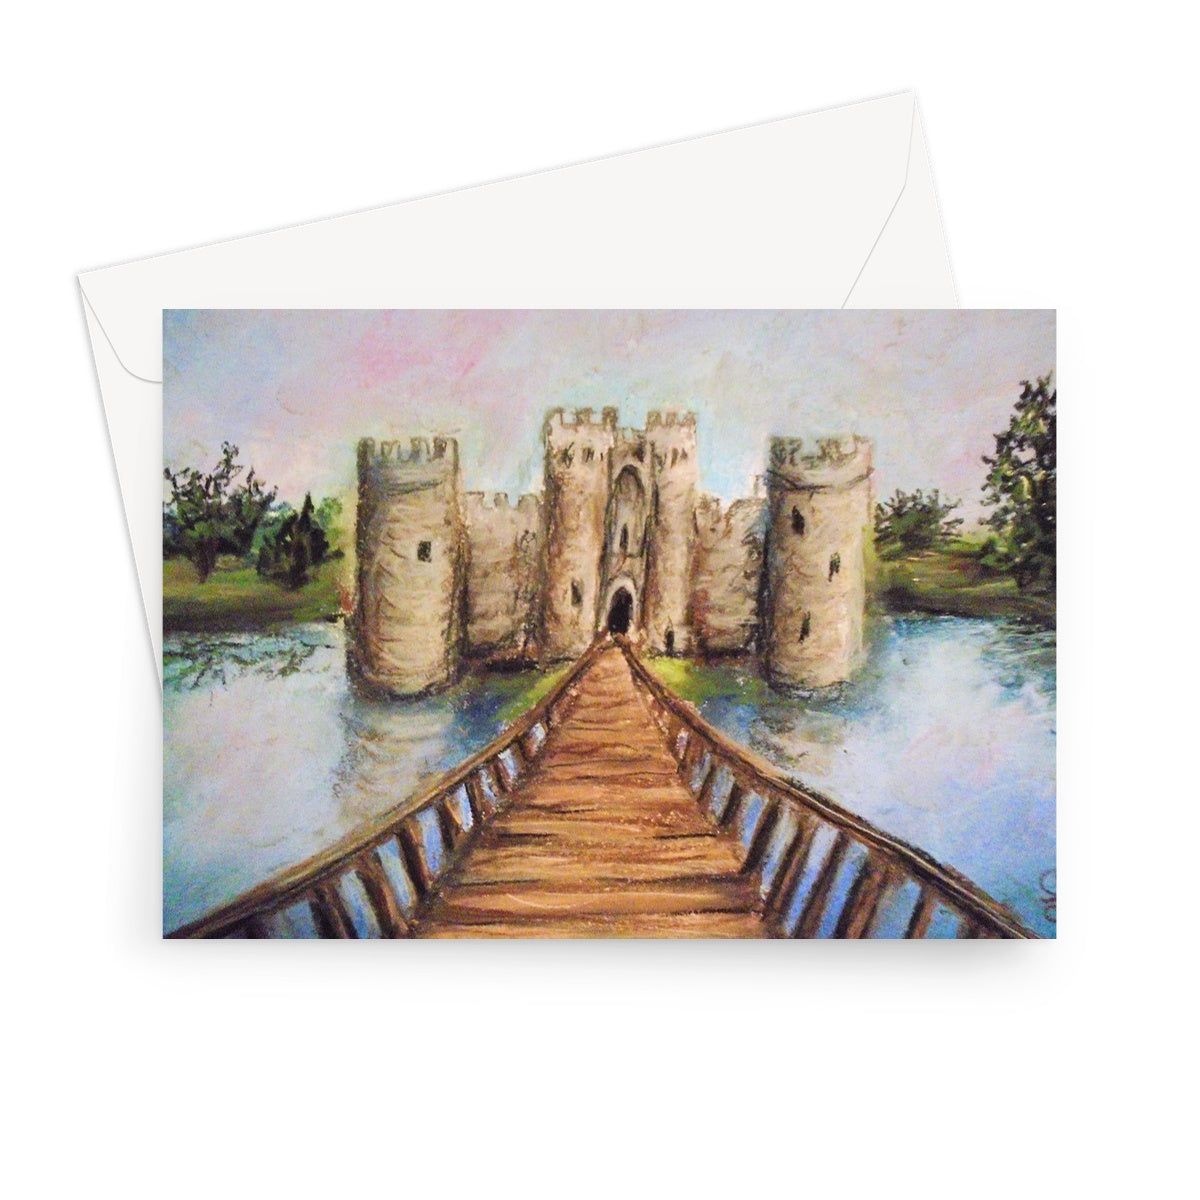 Ages of Dreams ~ High Quality Greeting Card